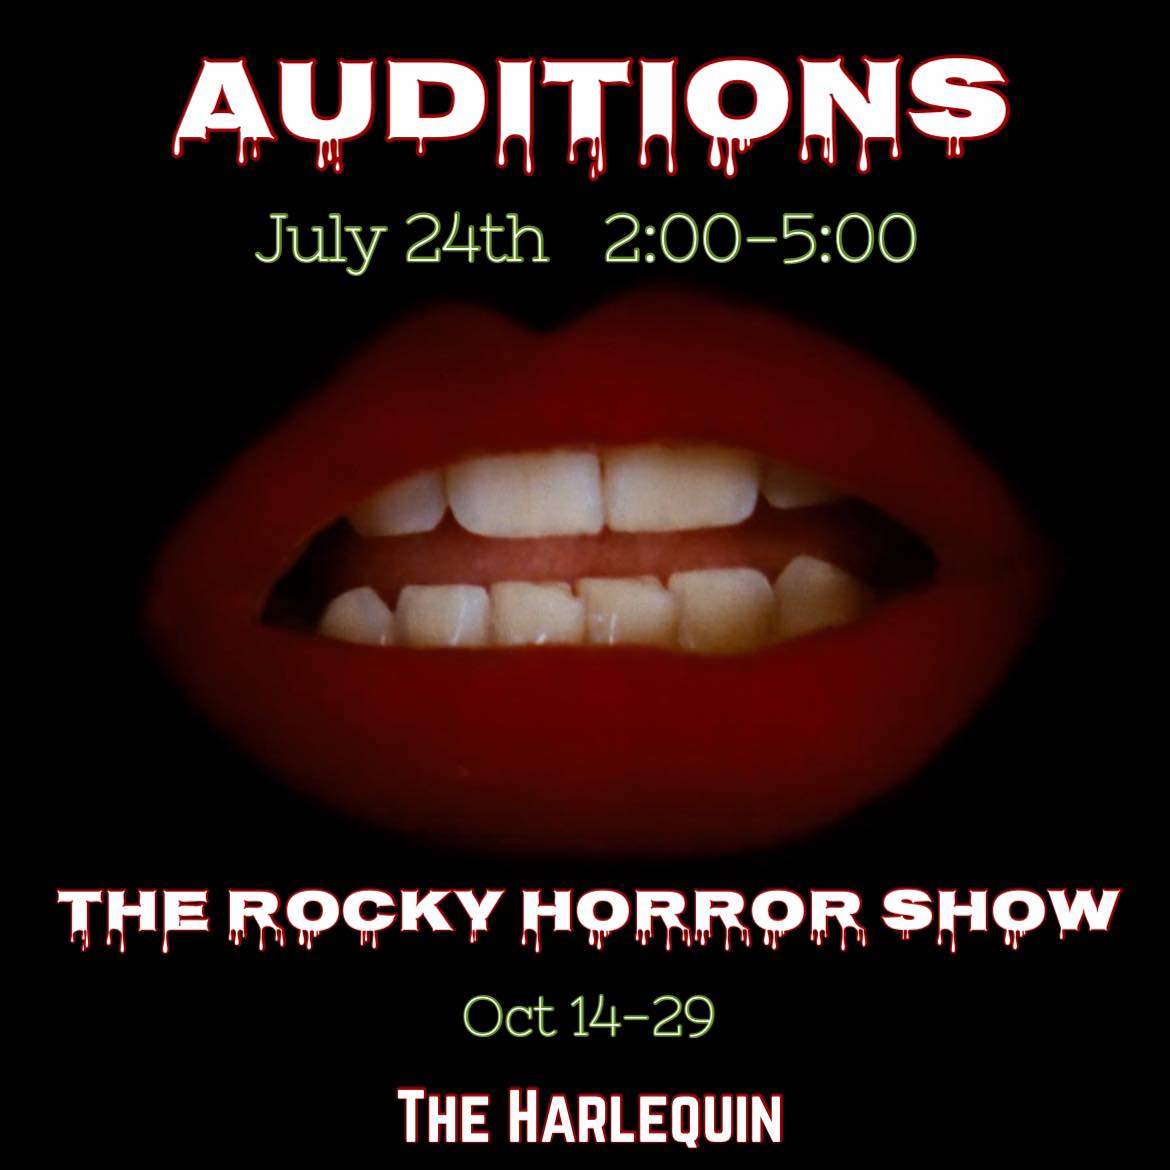 Auditions for The Rocky Horror Show, by The Harlequin, Ft. Sam Houston, San Antonio